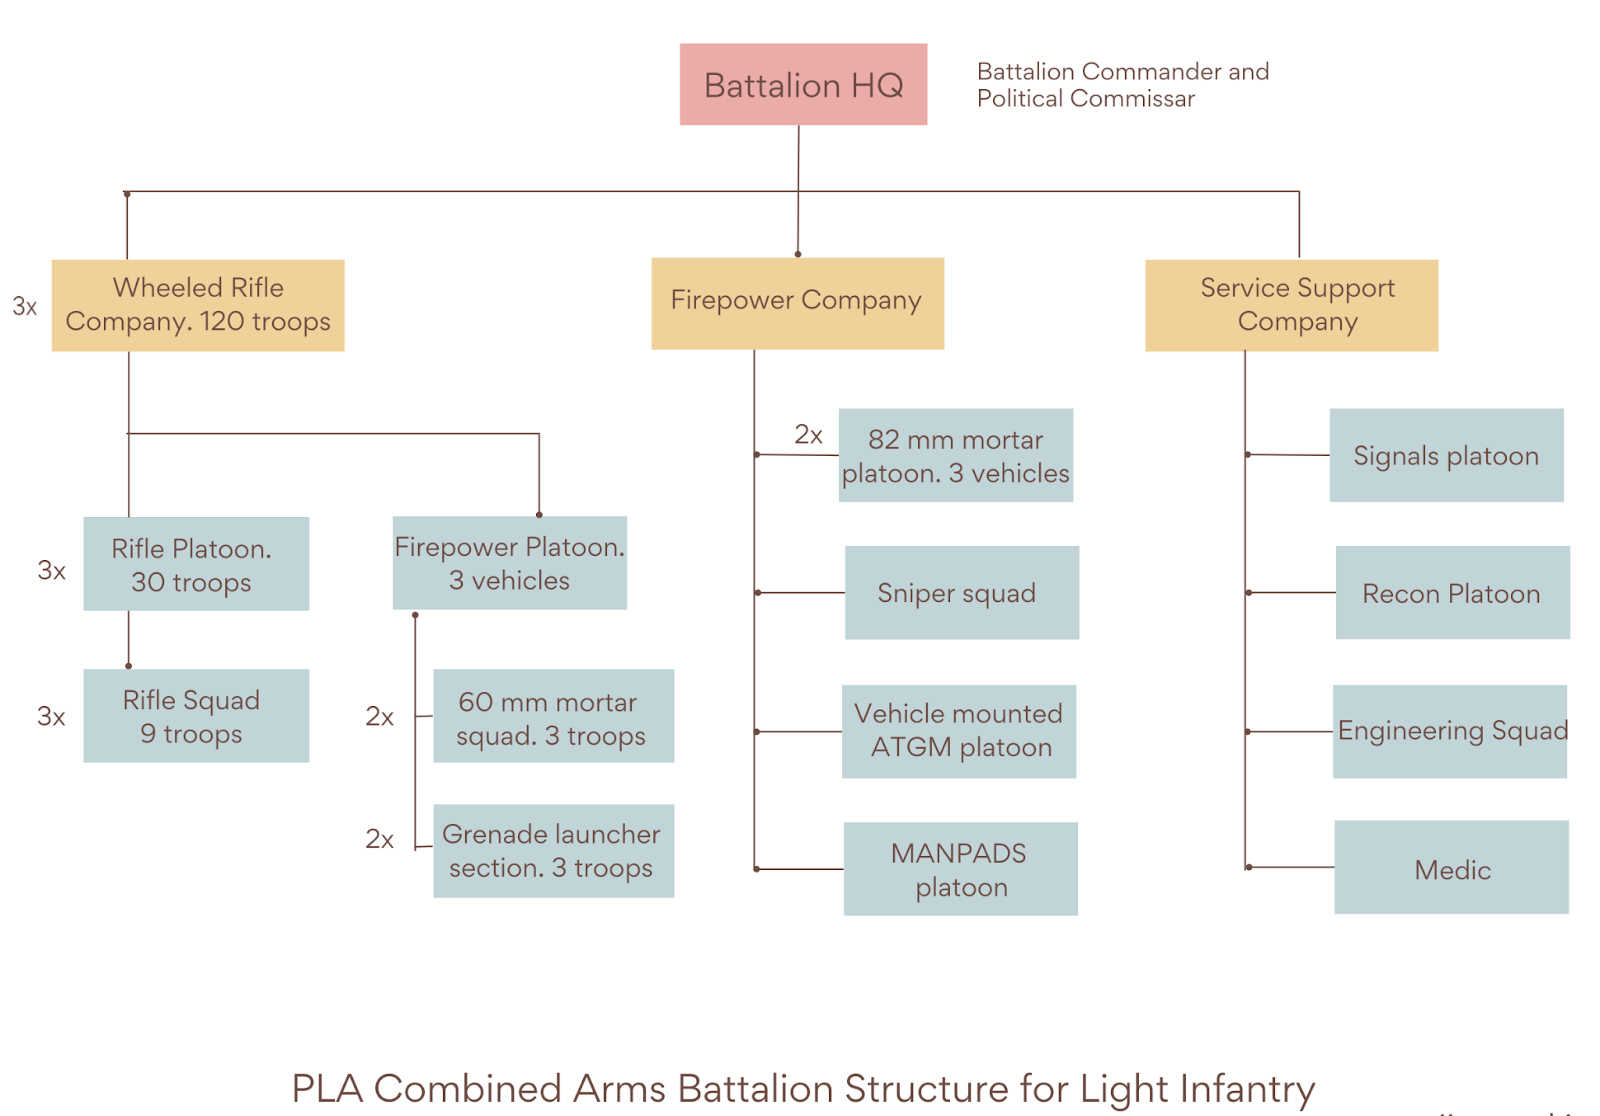 IMAGE 4: PLA’s Combined Arms Battalion Structure for Light Infantry